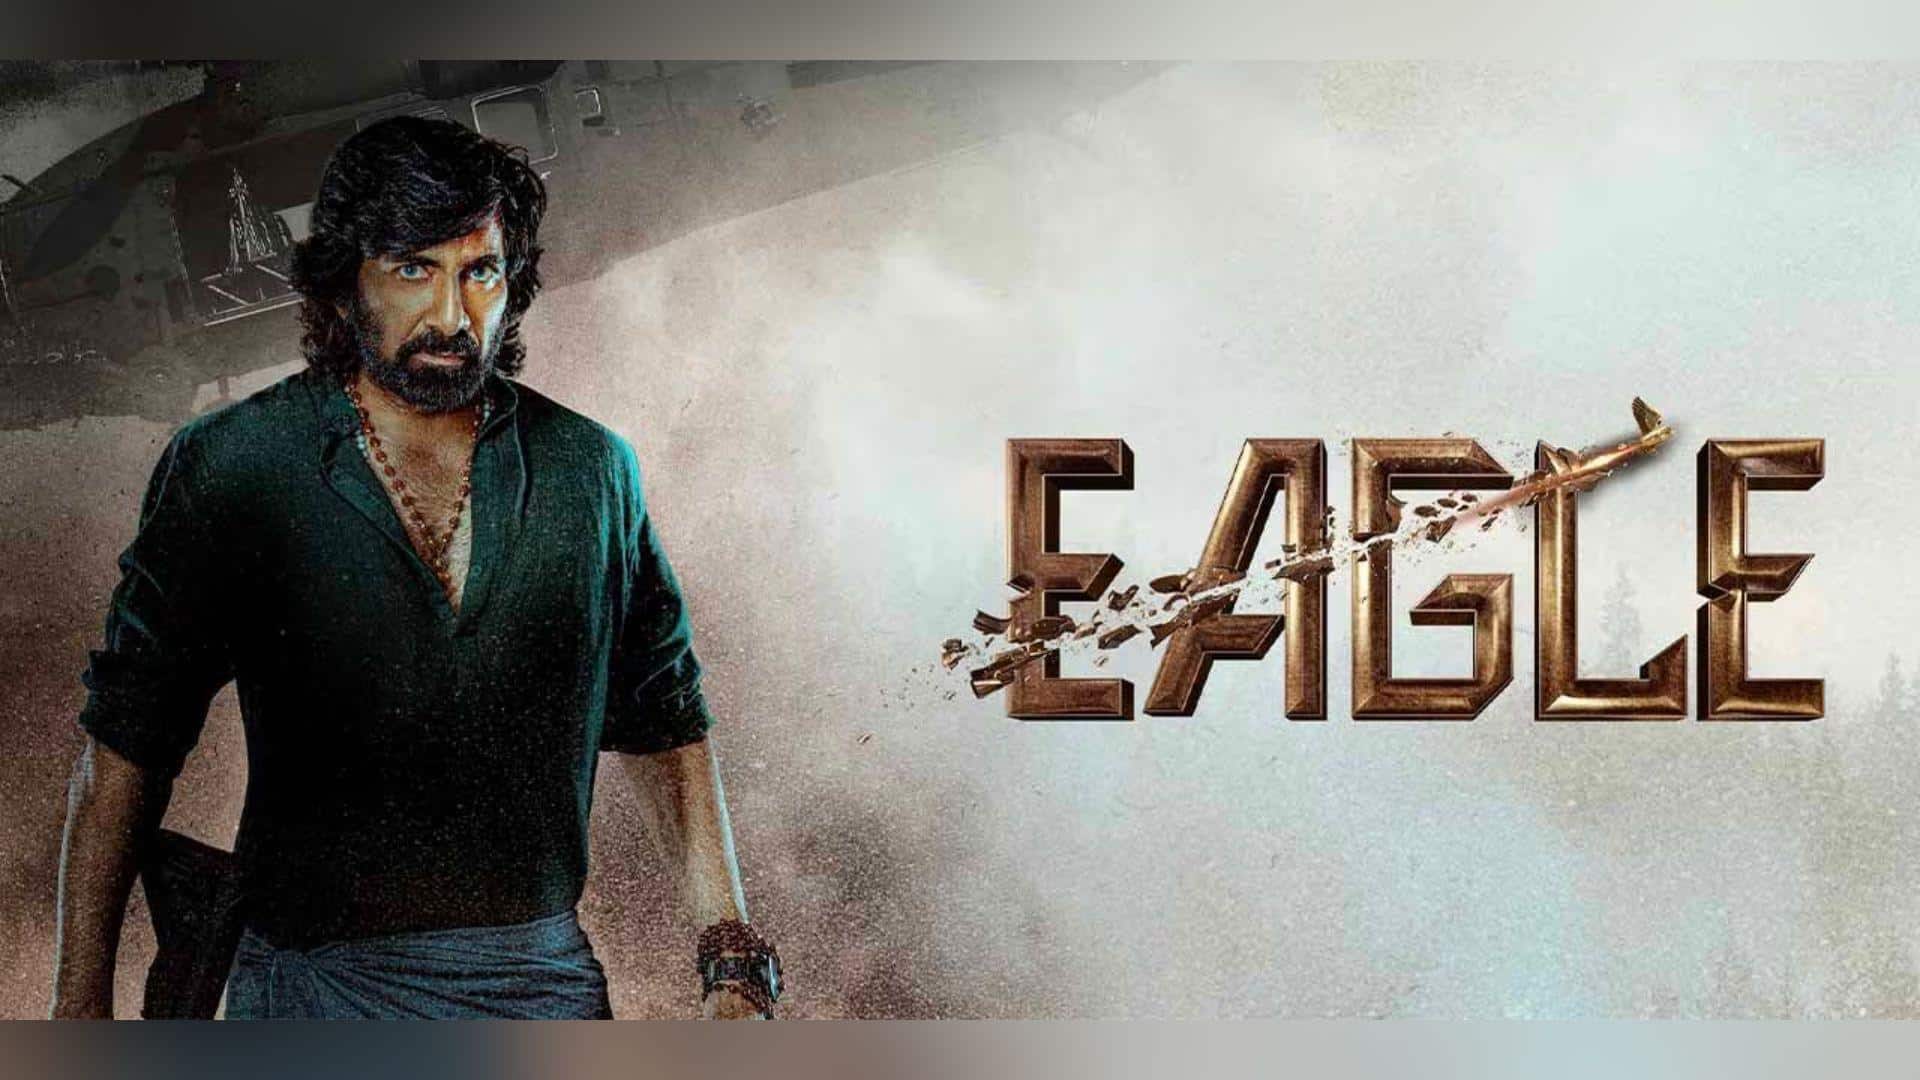 Box office: Ravi Teja's 'Eagle' takes off with decent start